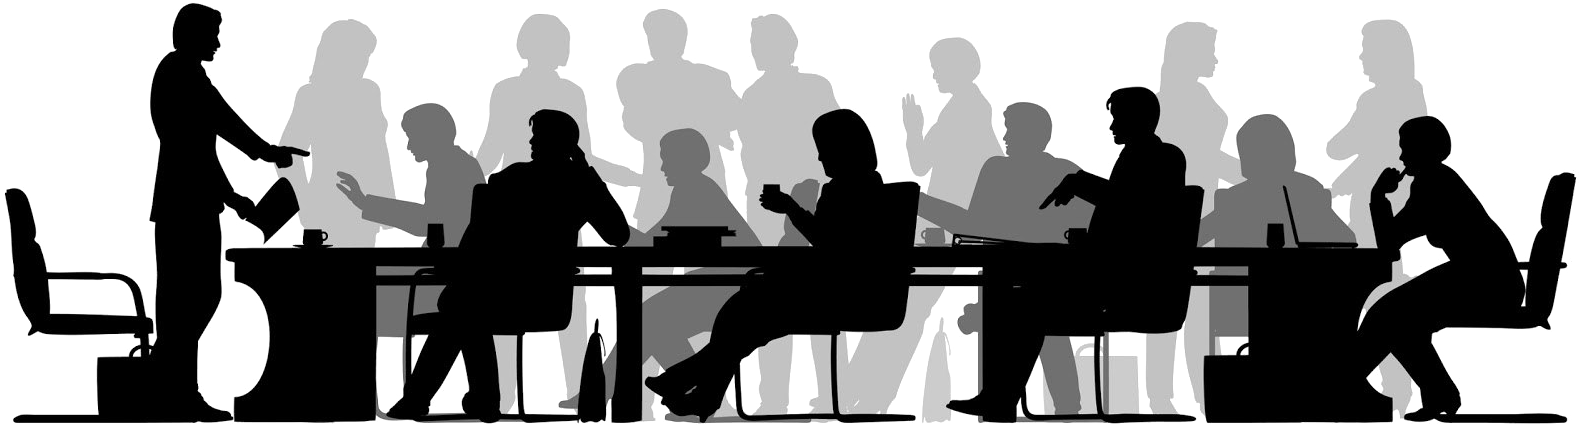 Meeting Png Images - Meeting Silhouette Clipart (1600x582), Png Download